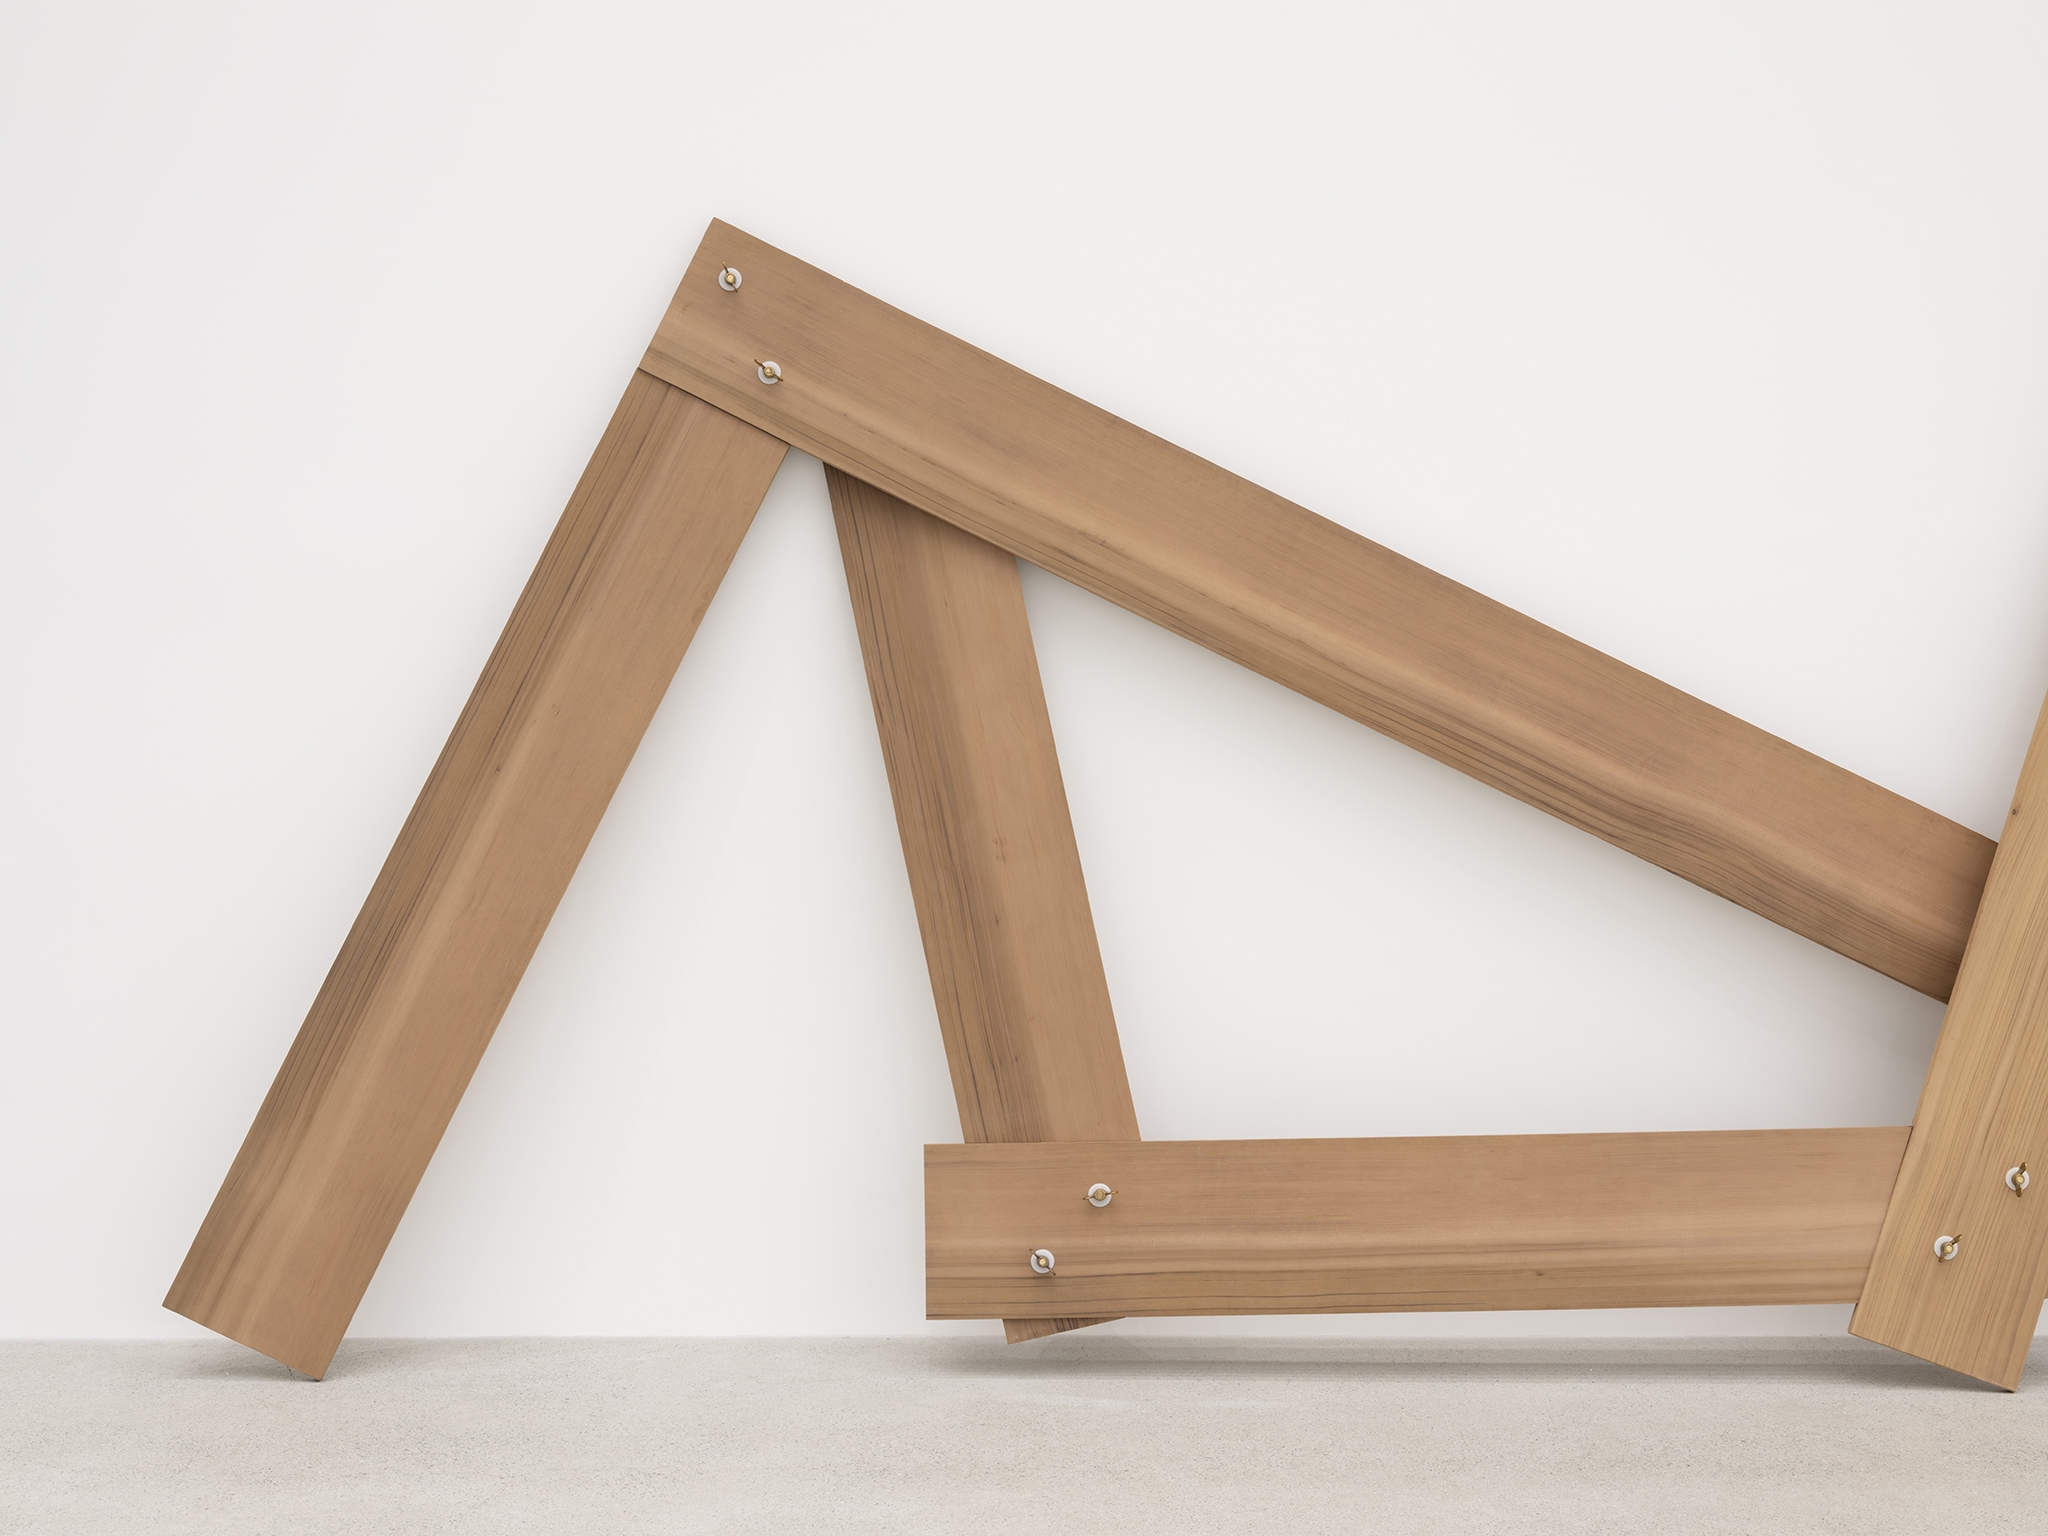 Christina Mackie, Lots/lost (The confusion part I) (detail), 2012, cedar, brass, nylon, 94 x 388 x 19 in. (238 x 986 x 48 cm) by 